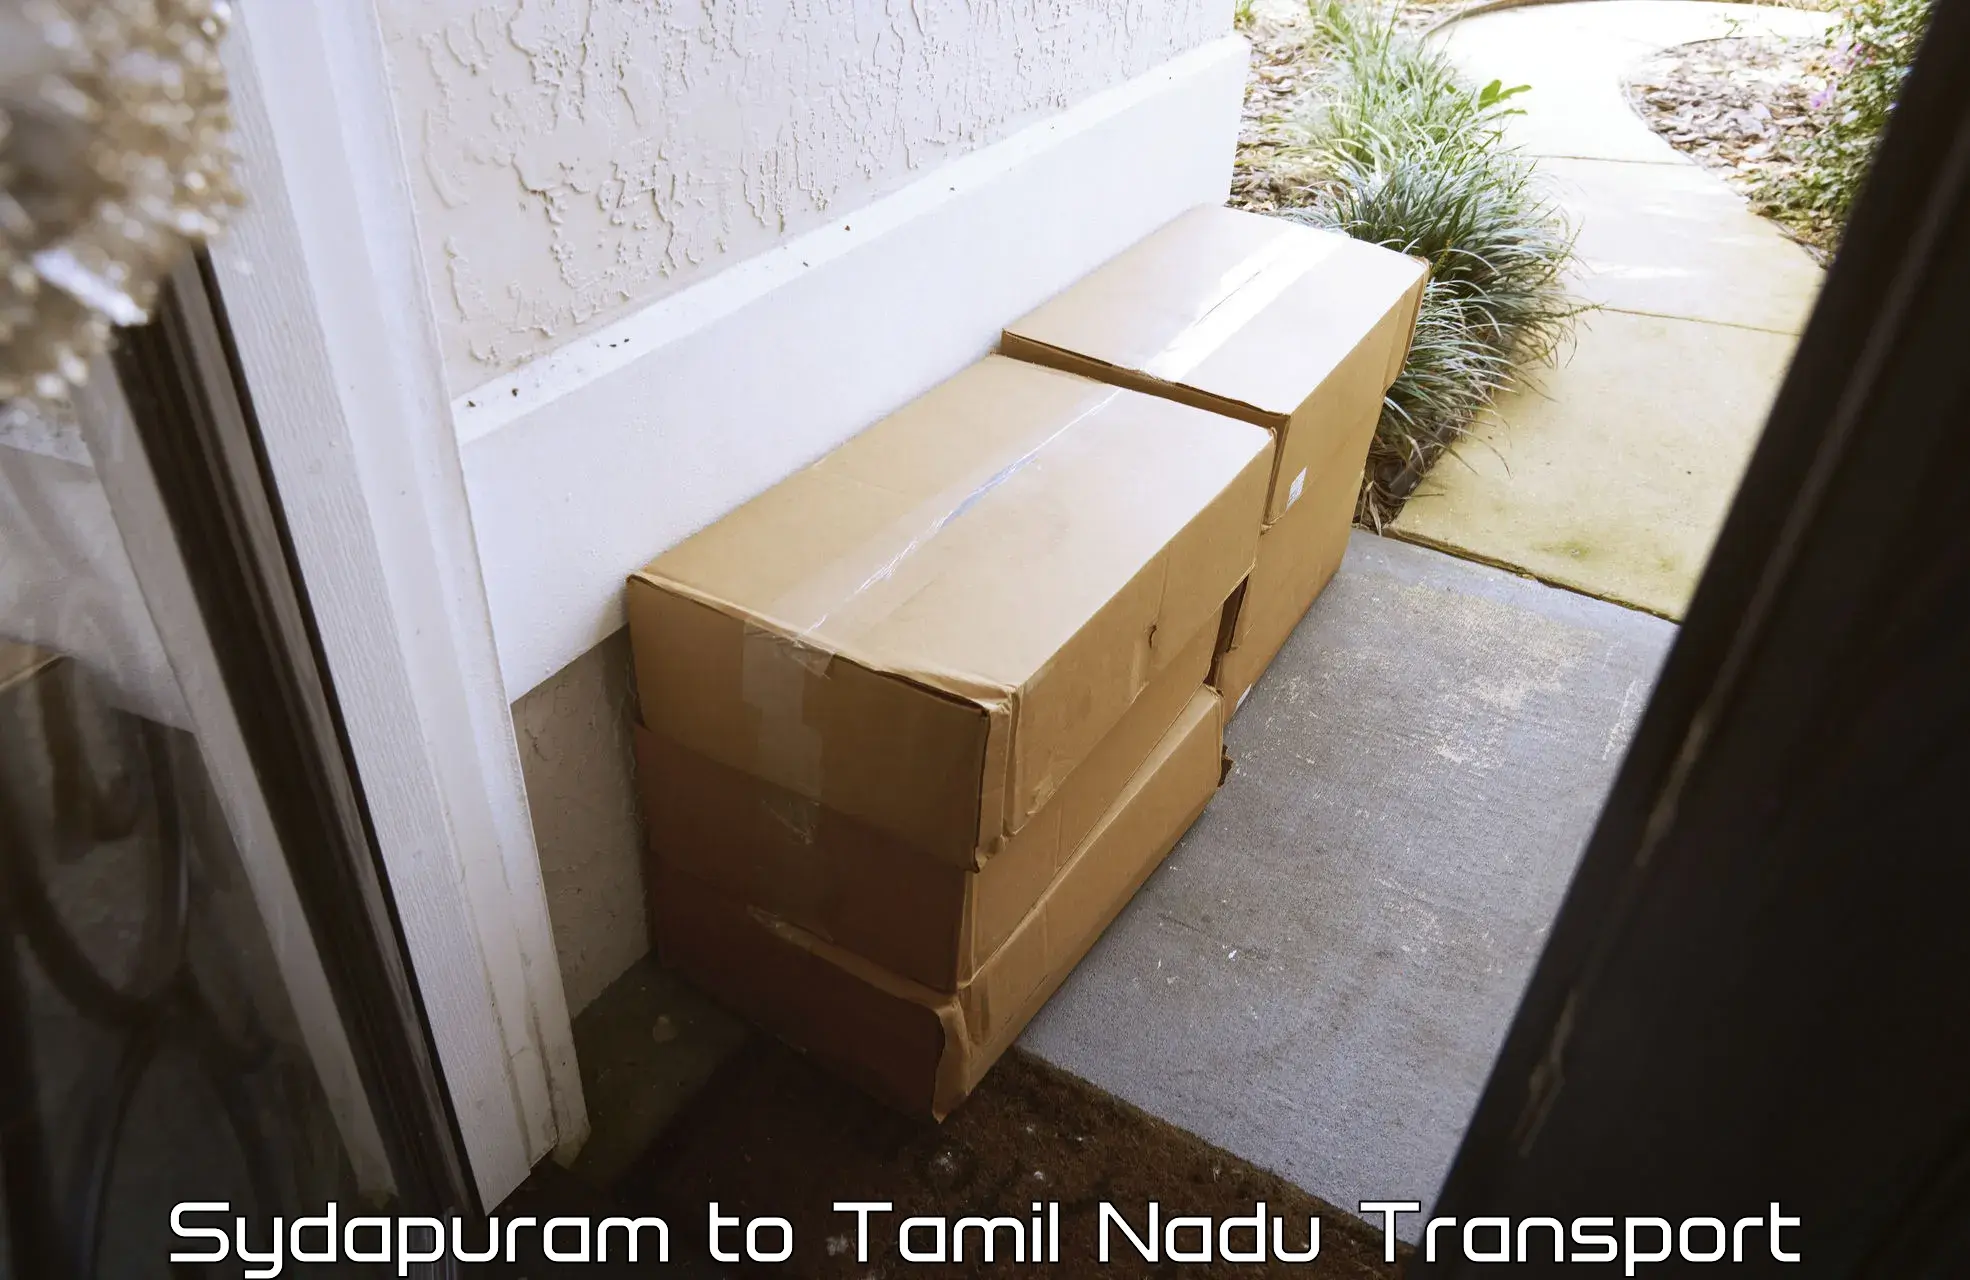 Vehicle transport services Sydapuram to SRM Institute of Science and Technology Chennai